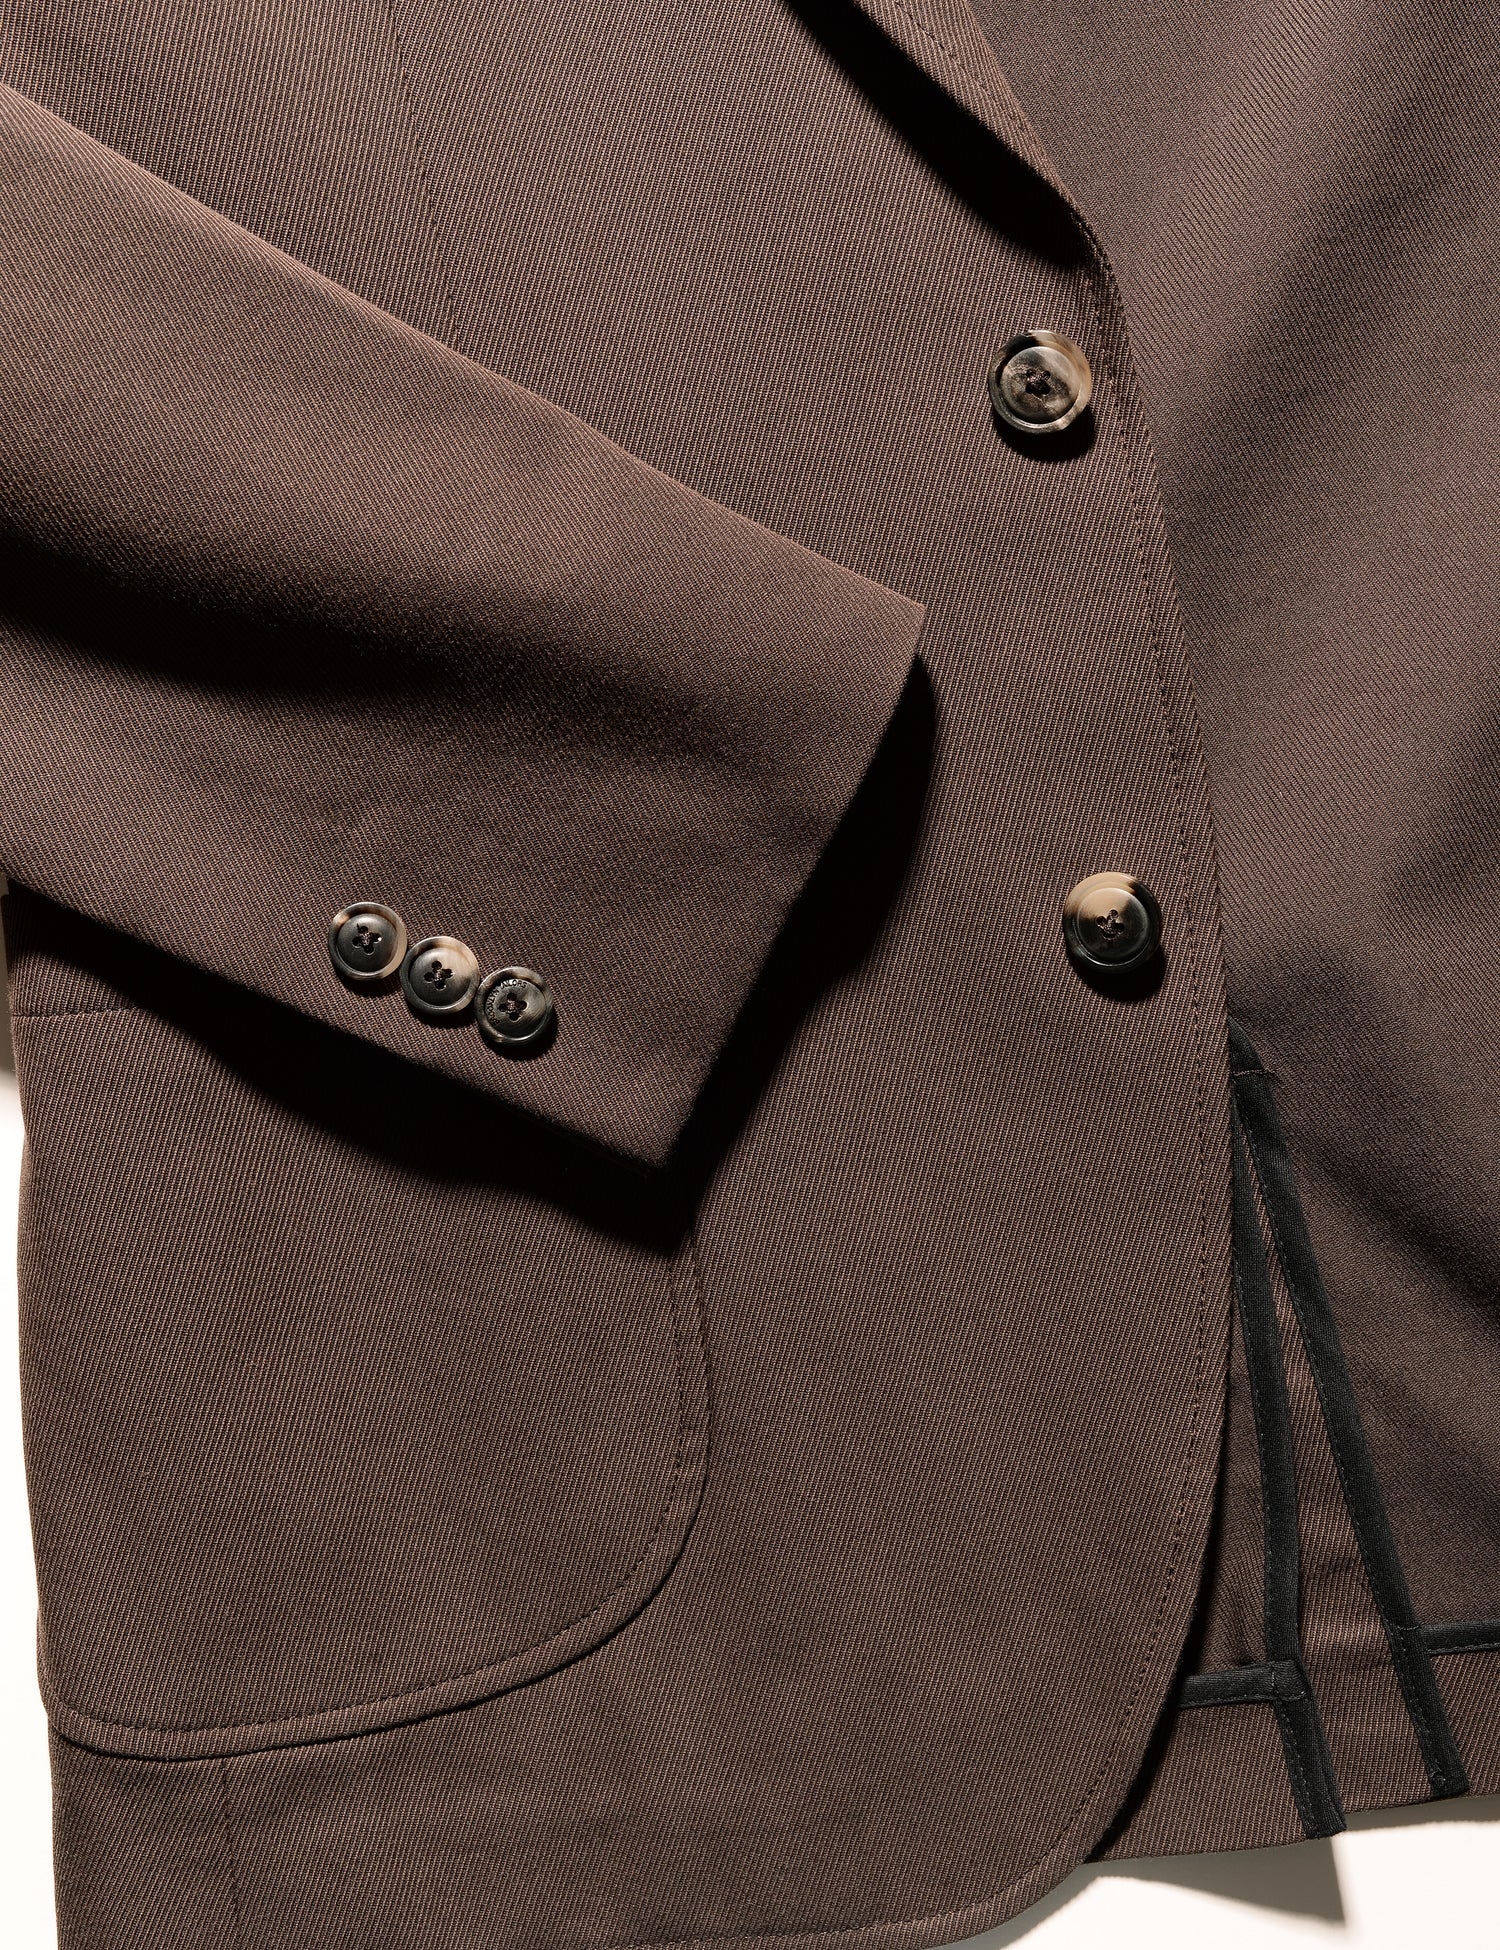 Detail of BKT35 Unstructured Jacket in Cavalry Twill - Rosewood showing cuff and patch pocket